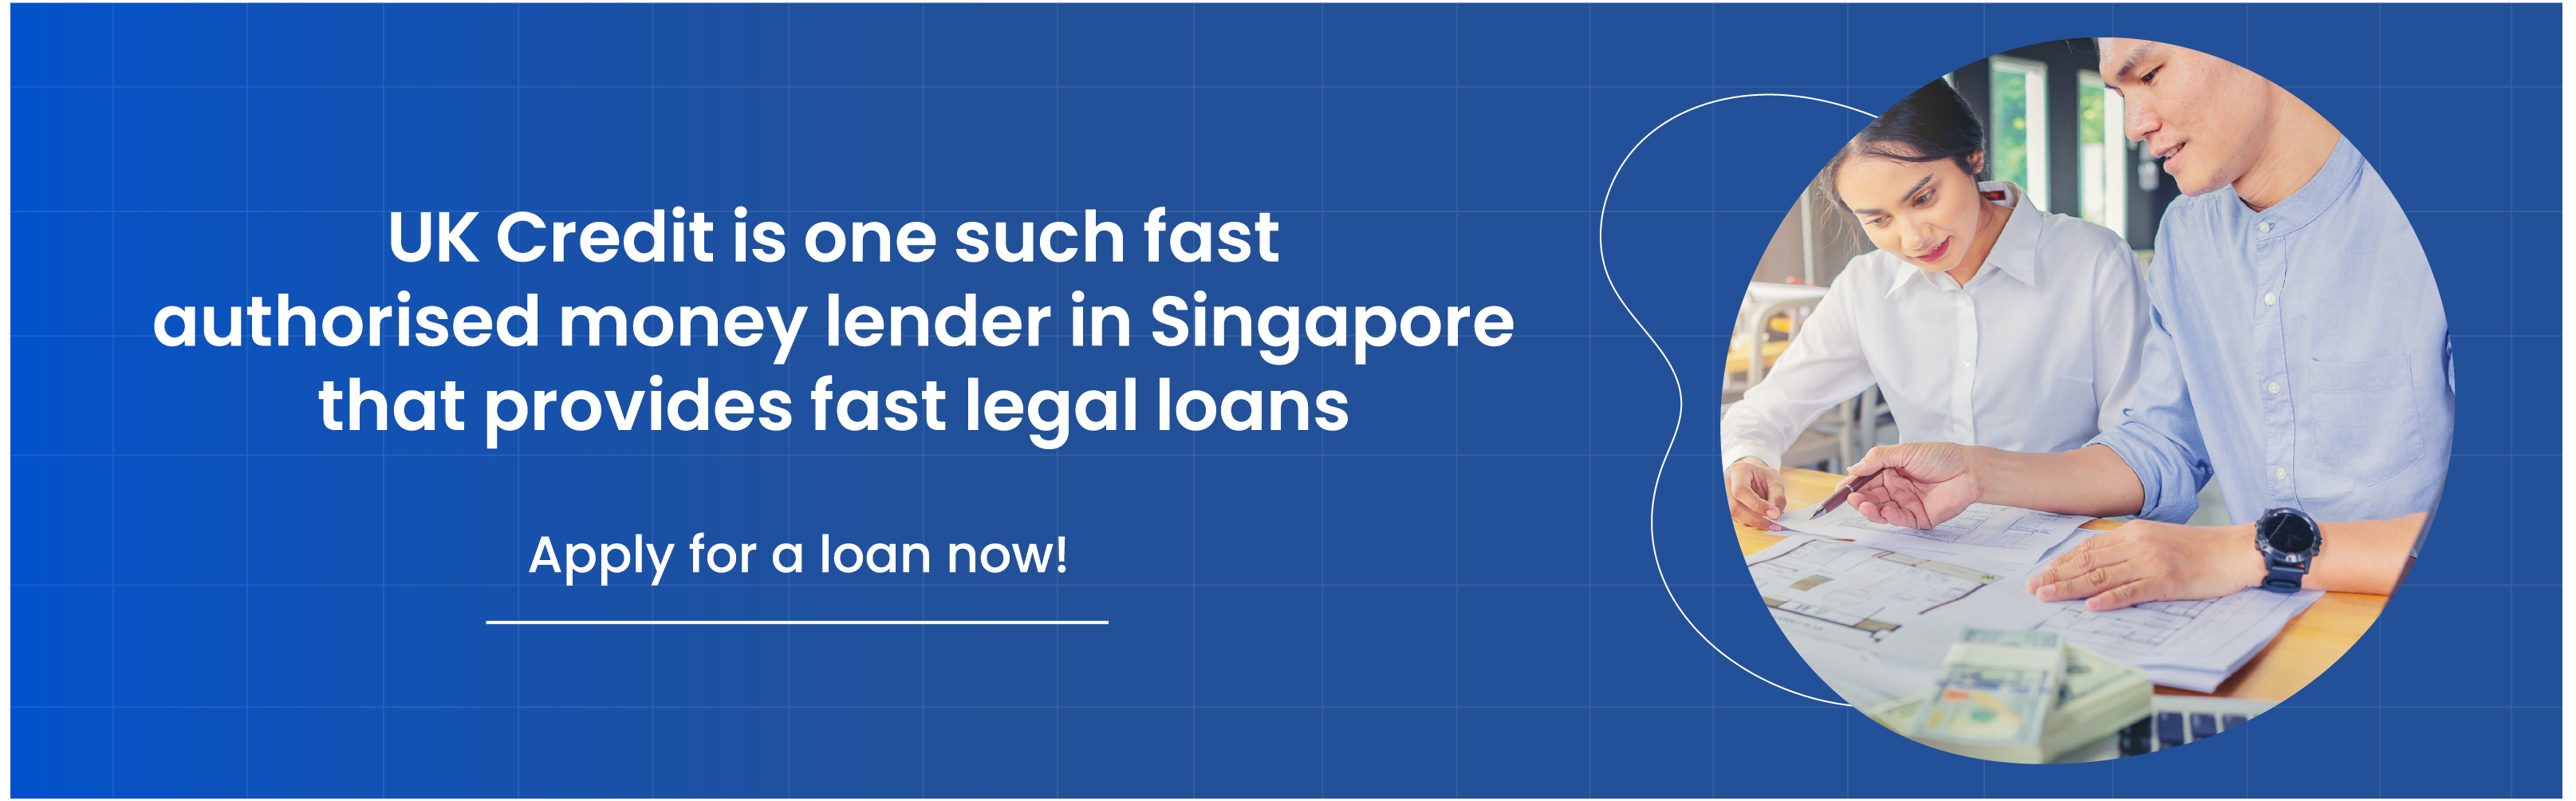 UK Credit is one such fast authorised money lender in Singapore that provides fast legal loans